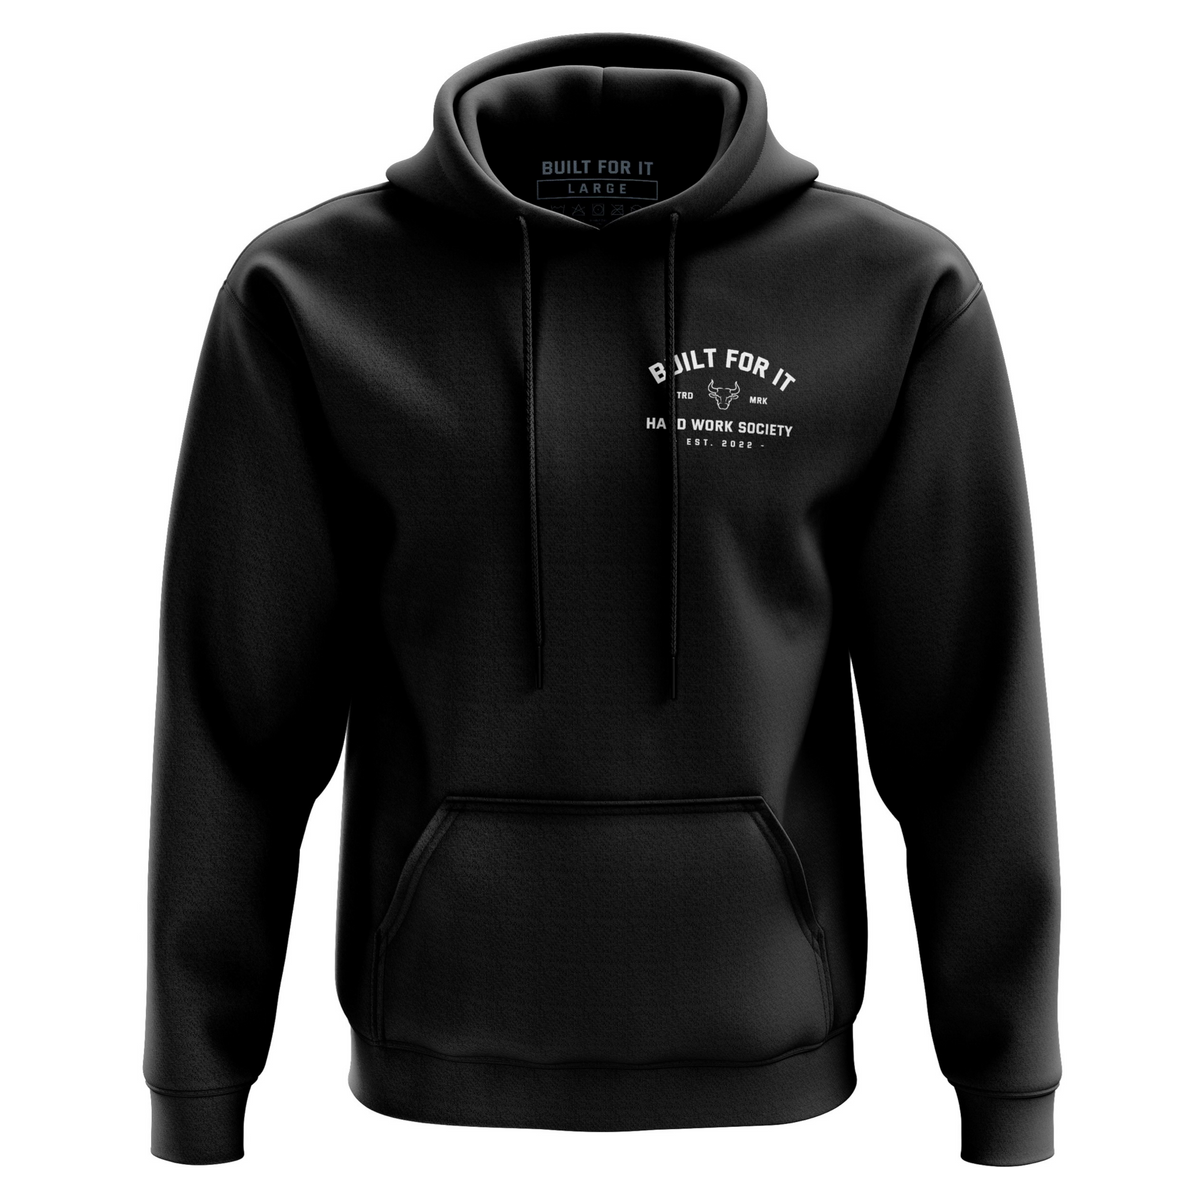 Learn To Love The Grind And It Will Pay You Back Hoodie